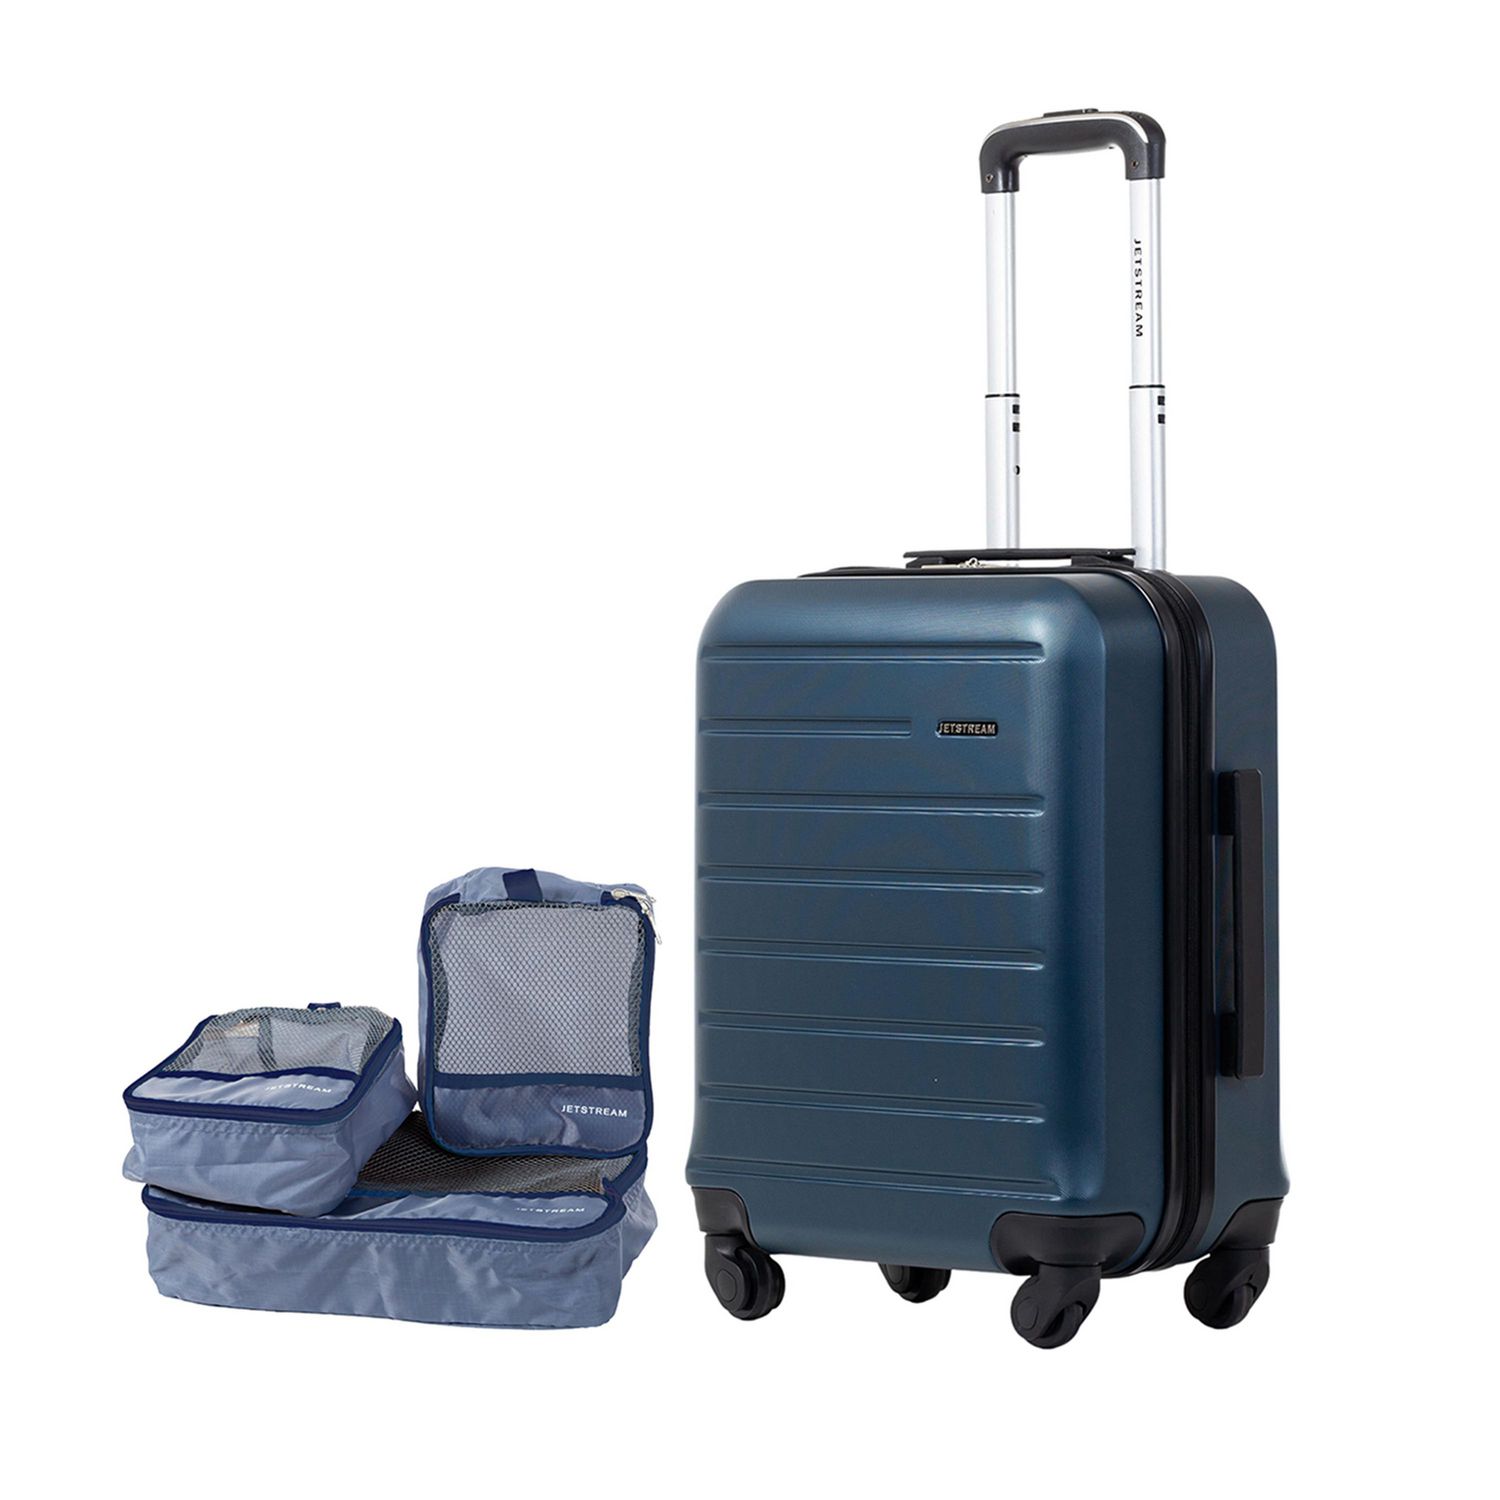 JetStream® Carry-On Hardside Luggage with 3 pieces packing cubes